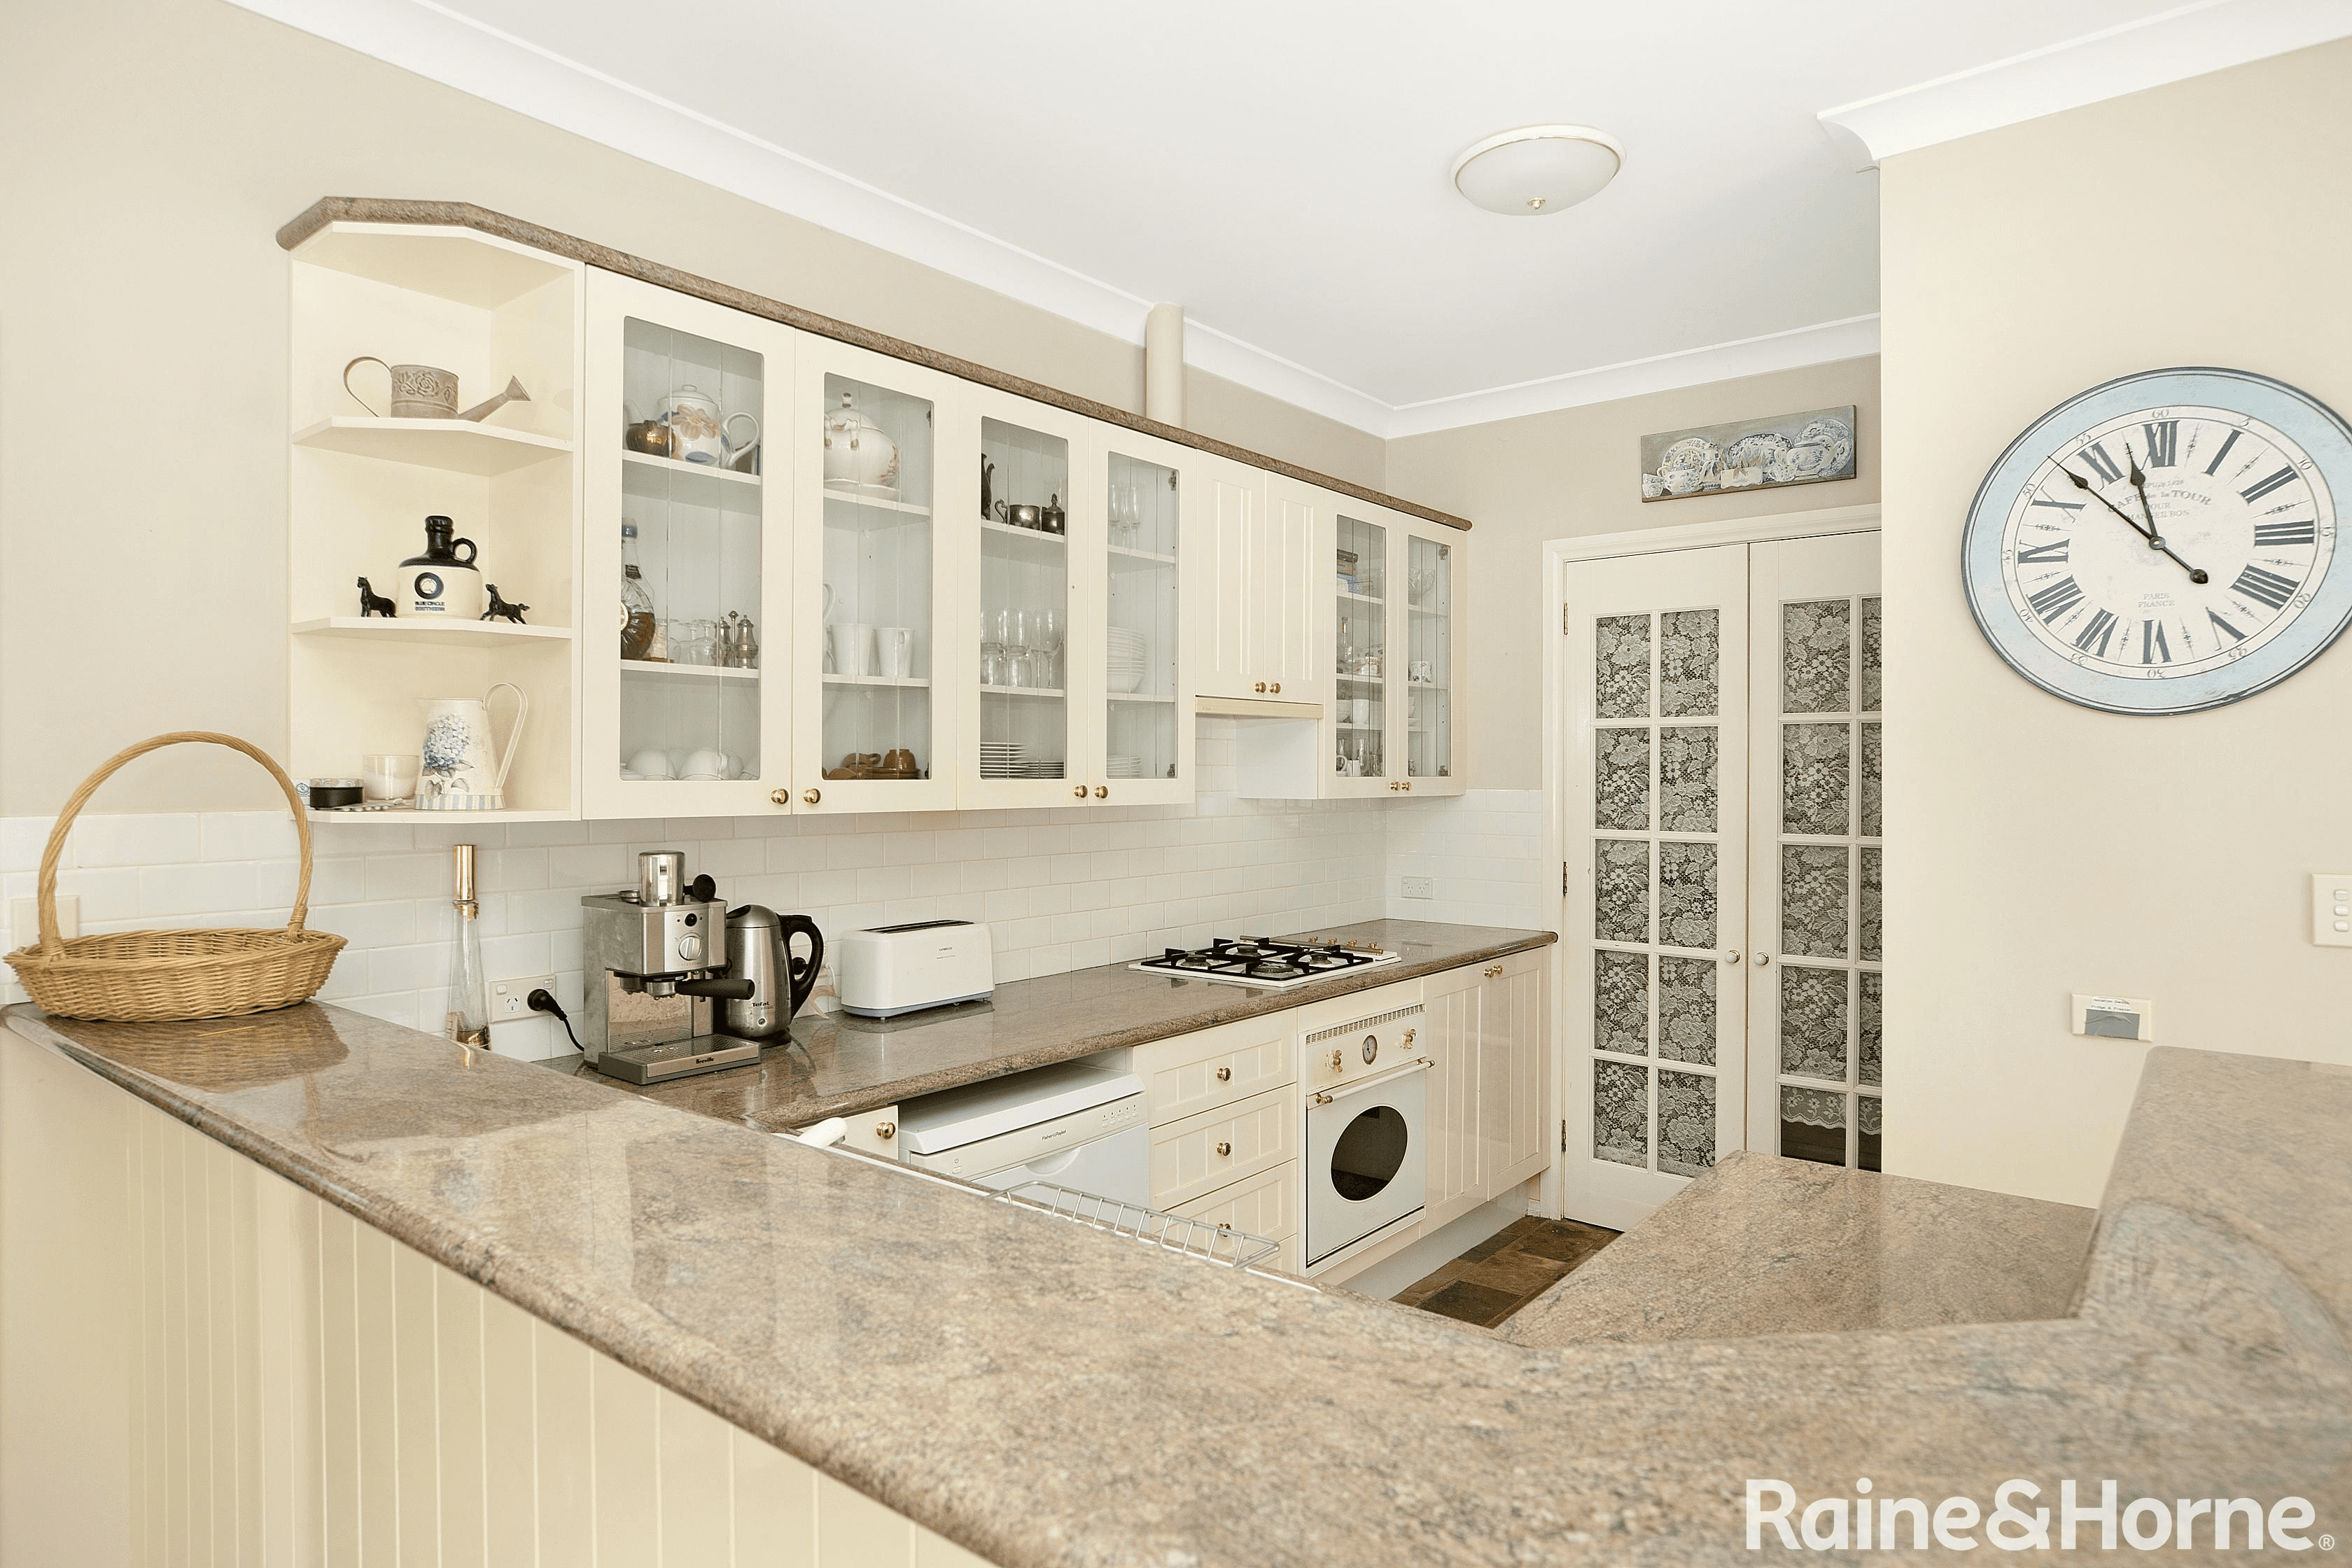 631 Hanging Rock Road, SUTTON FOREST, NSW 2577